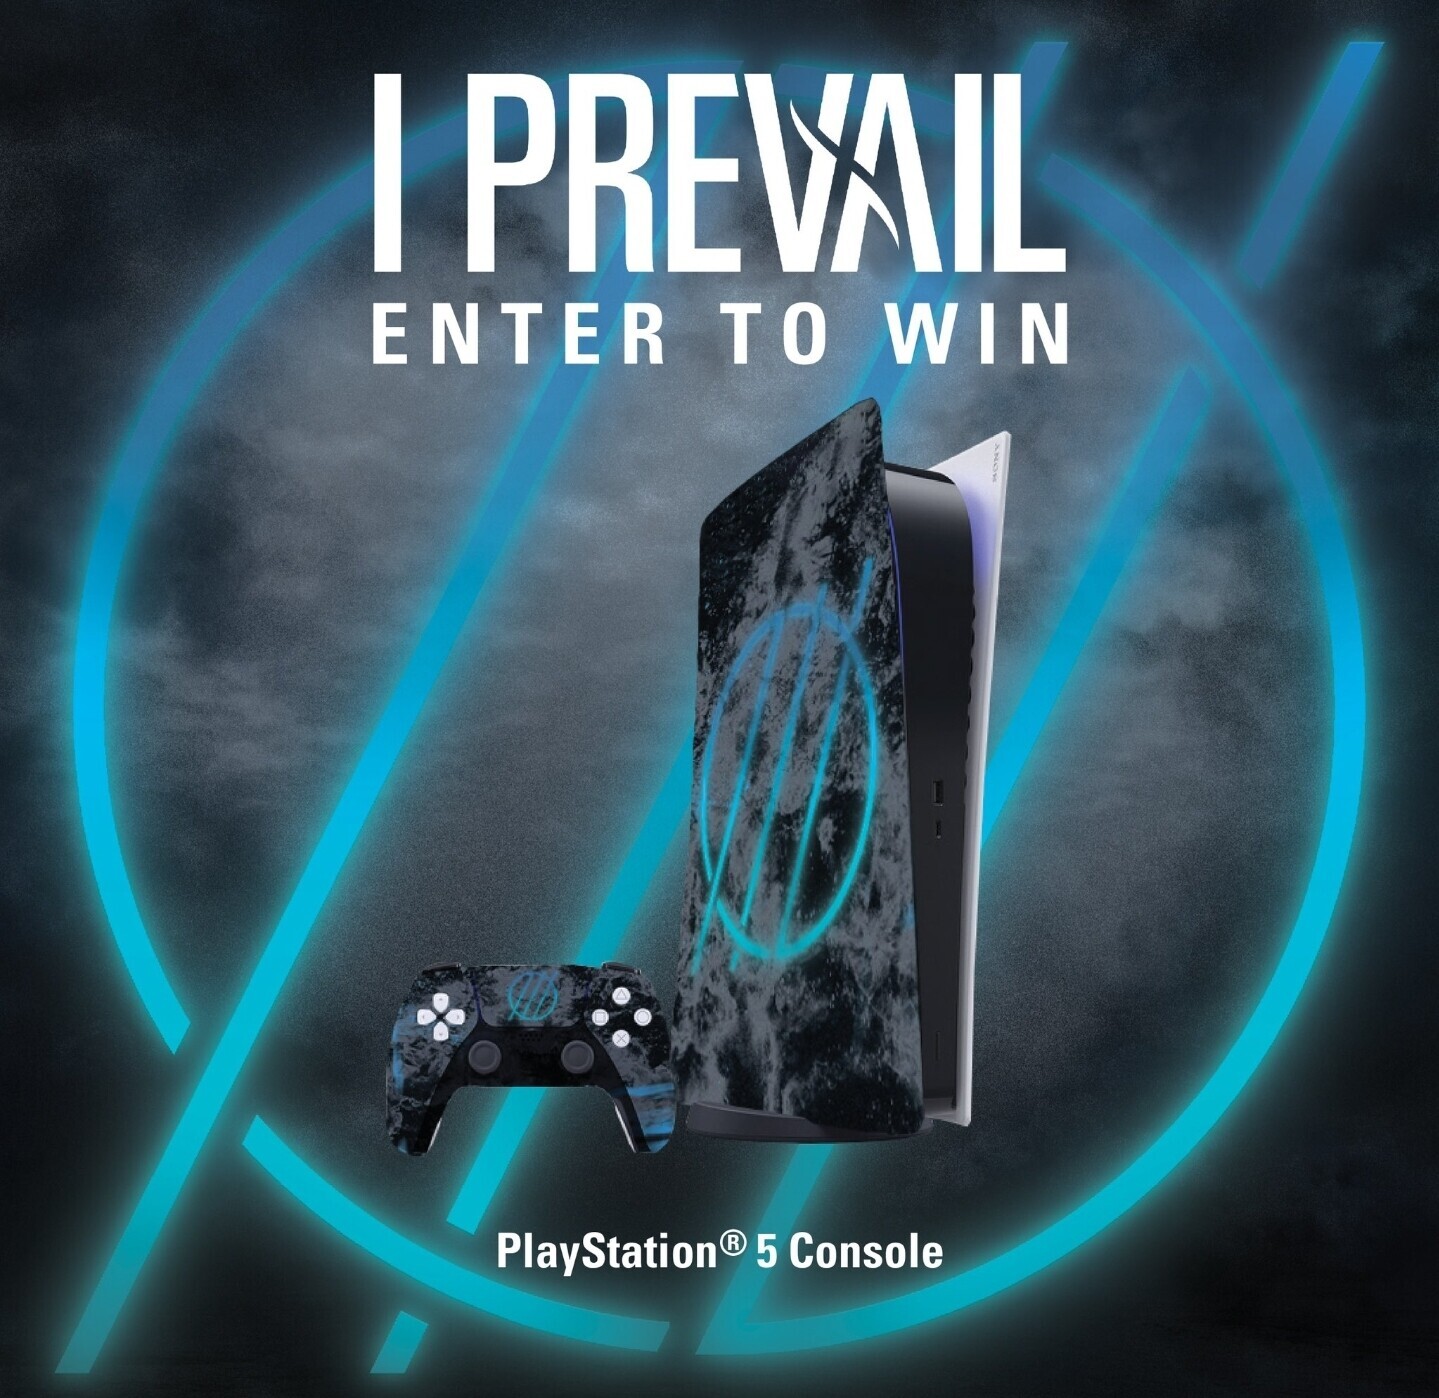  Sony PlayStation 5 Digital I Prevail Console